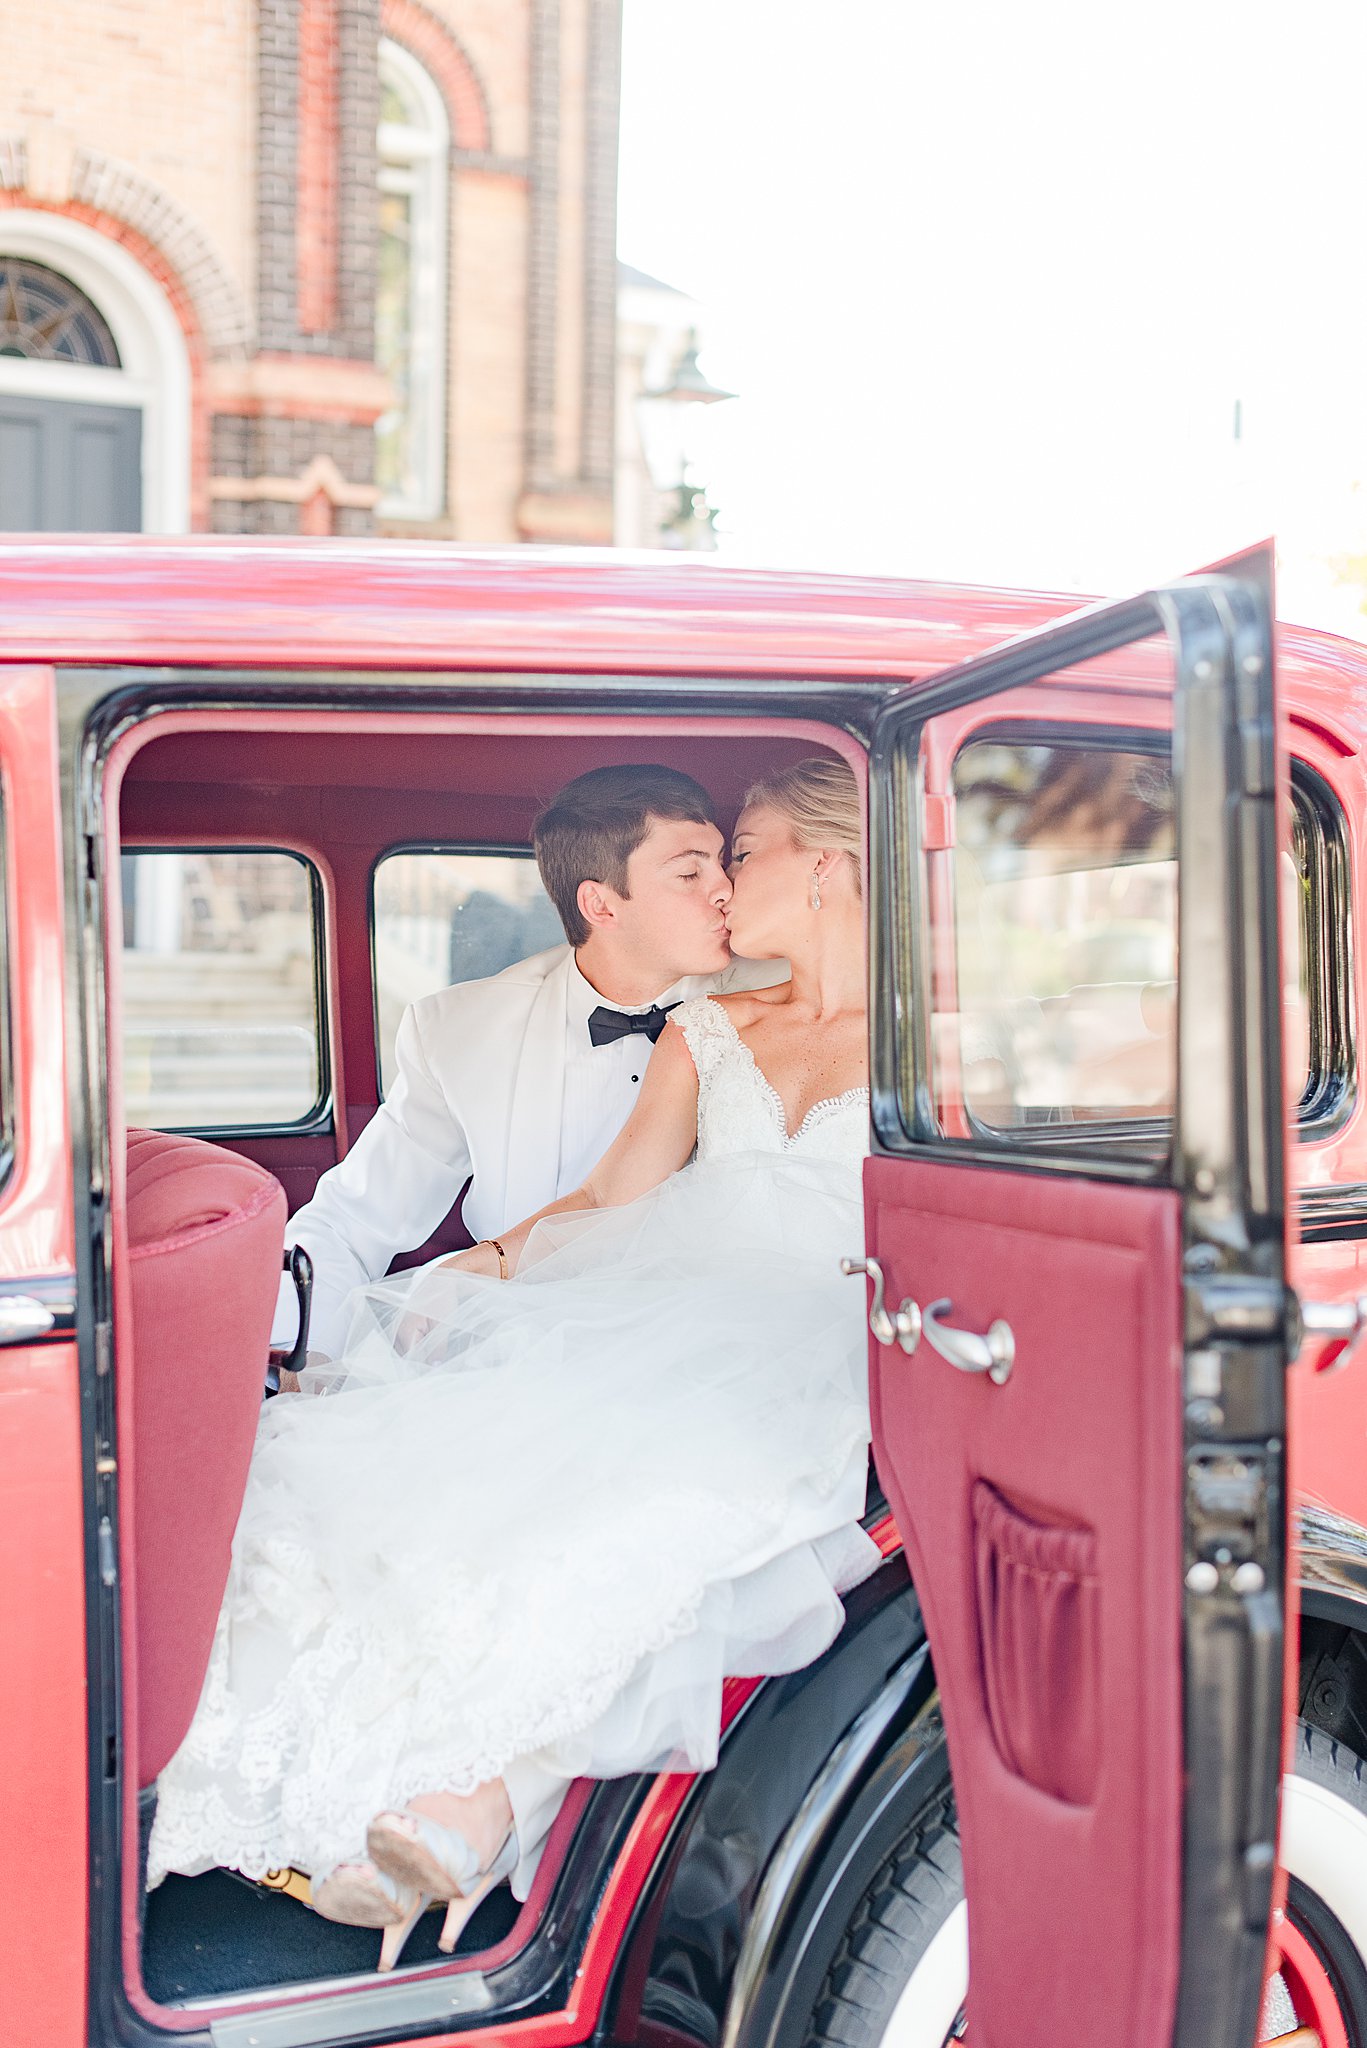 Newlyweds in white suit and lace dress kiss while sitting in the back of a vintage red car